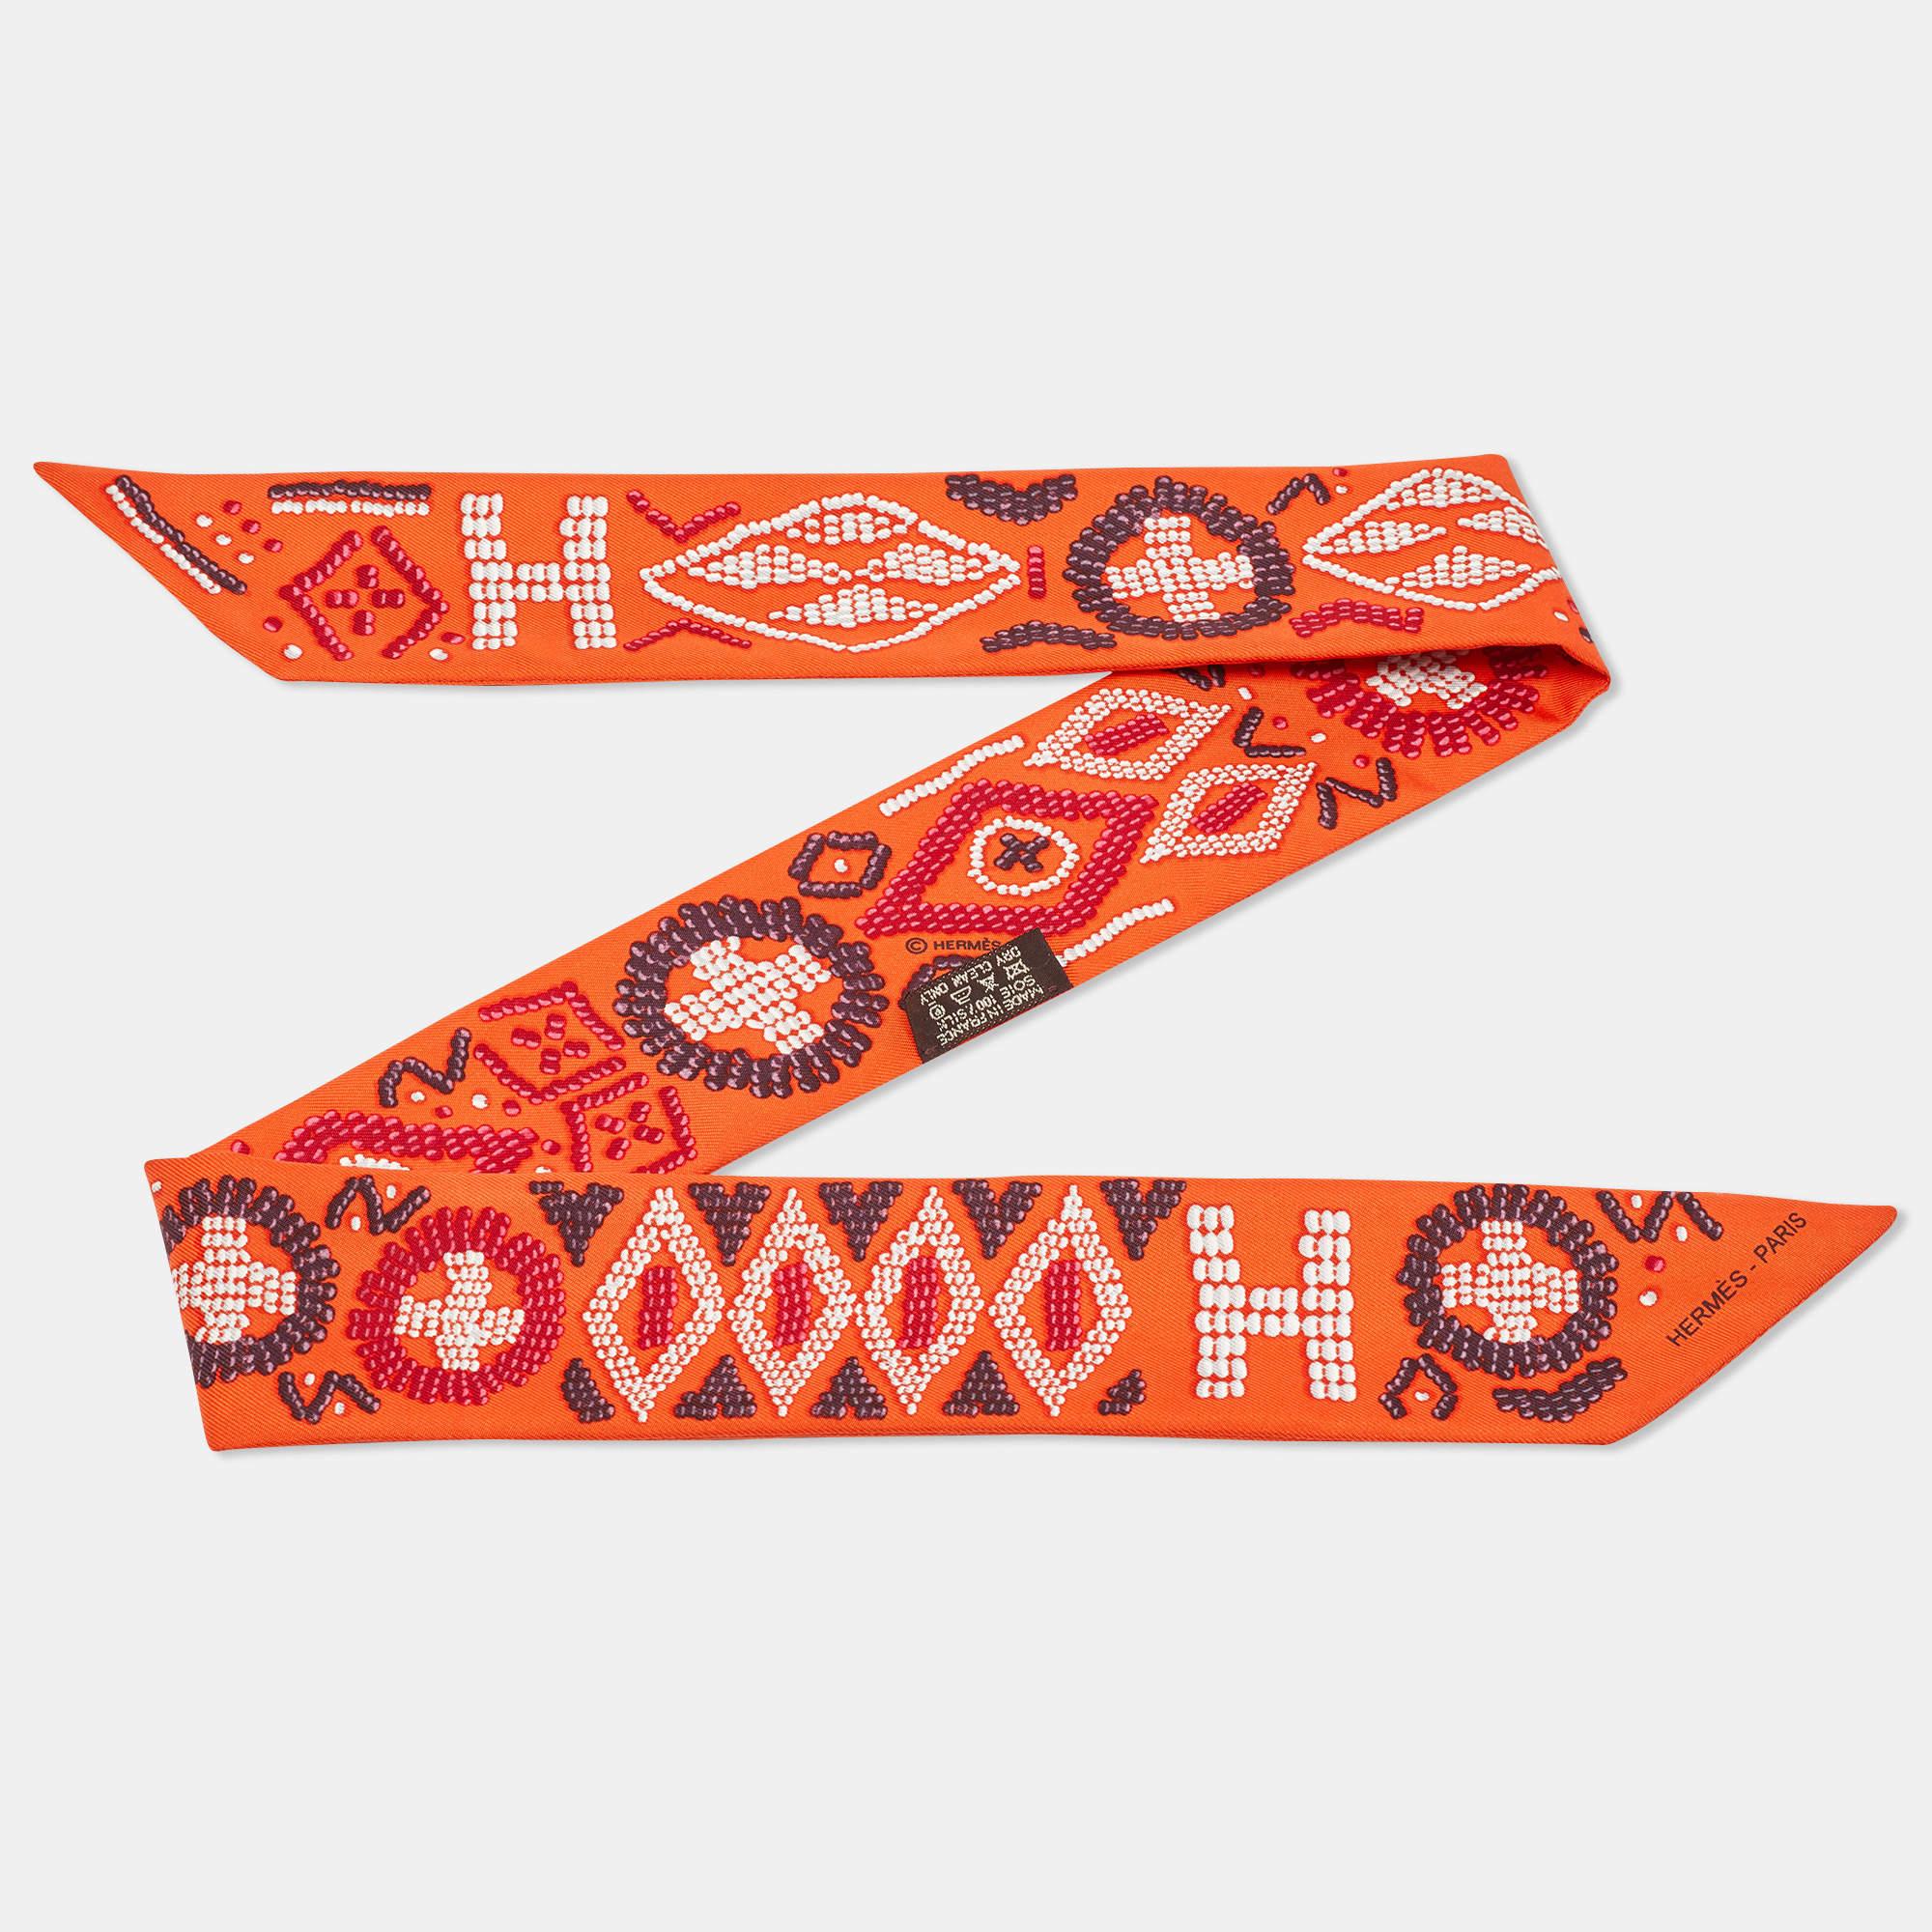 The Hermès twilly is a luxurious accessory featuring a vibrant orange hue and the iconic Kelly En Perles print. Crafted from high-quality silk, it adds a touch of elegance and sophistication to any ensemble.

